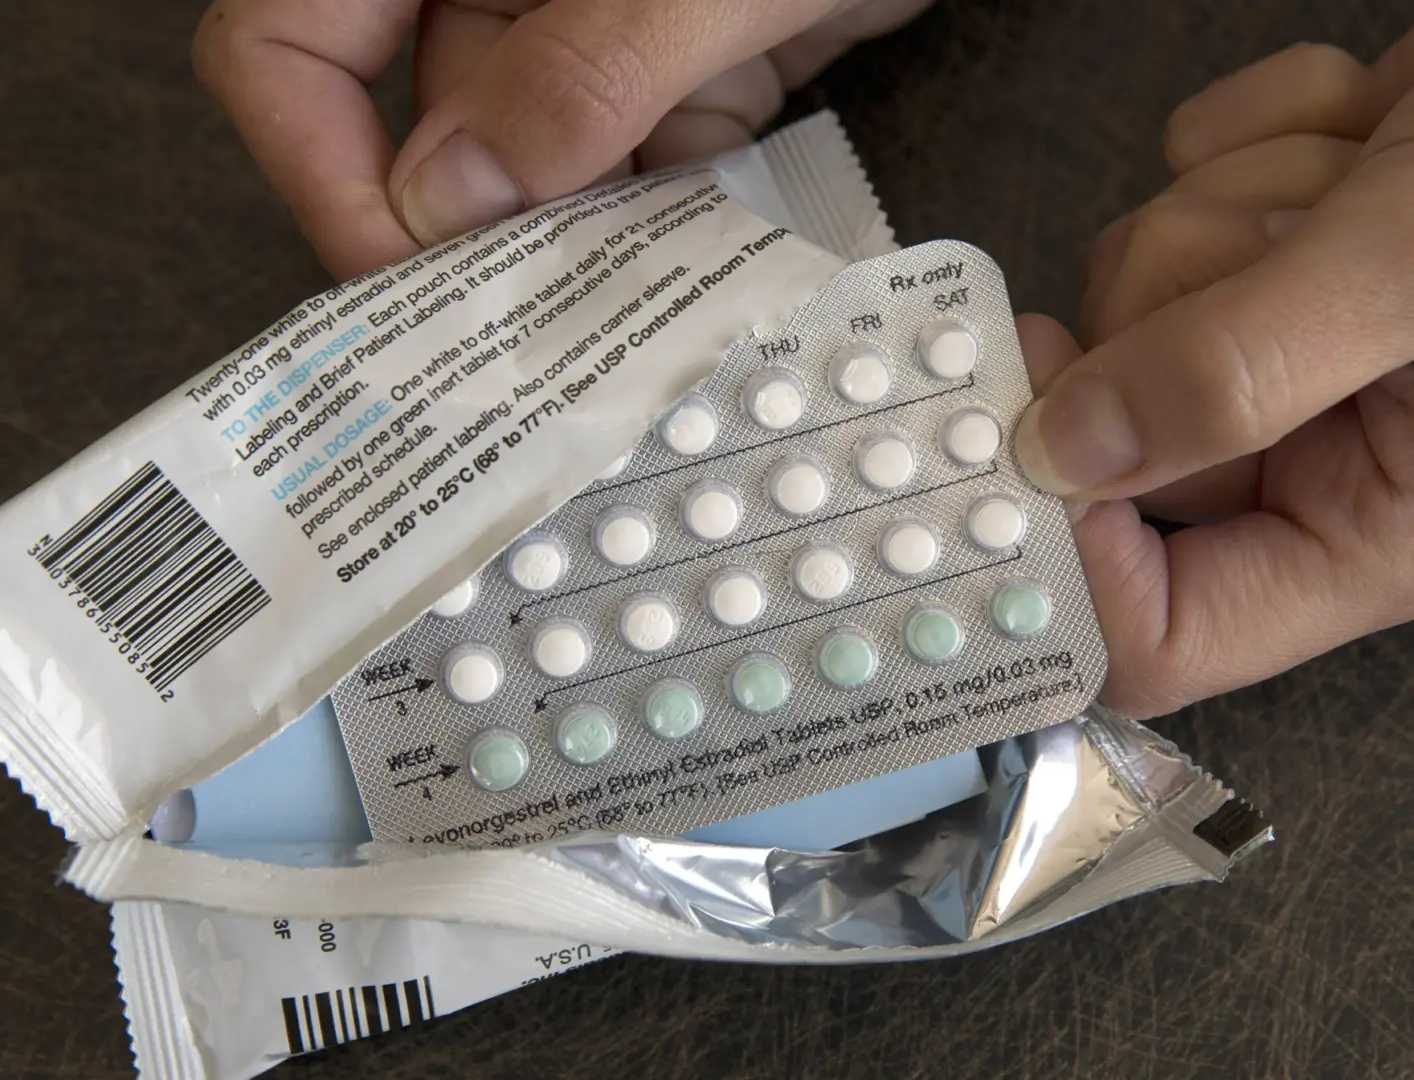 Medicare is not required to cover contraception to prevent pregnancies. As a result, contraceptive use is low among reproductive-aged people with disabilities who rely on Medicare insurance, according to a new University of Pittsburgh study.
